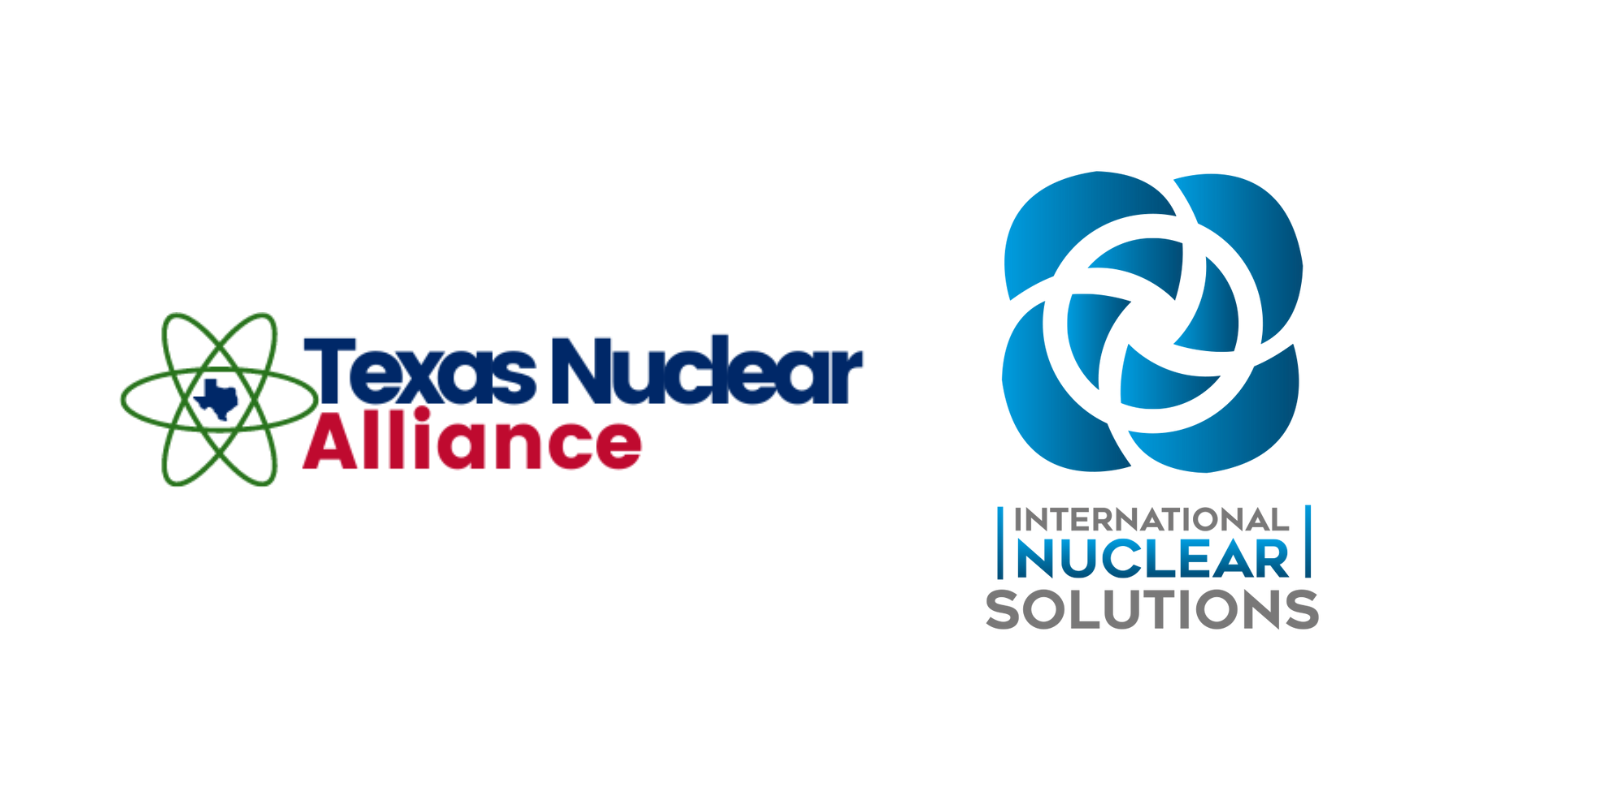 International Nuclear Solutions Joins Texas Nuclear Alliance as a Founding Member